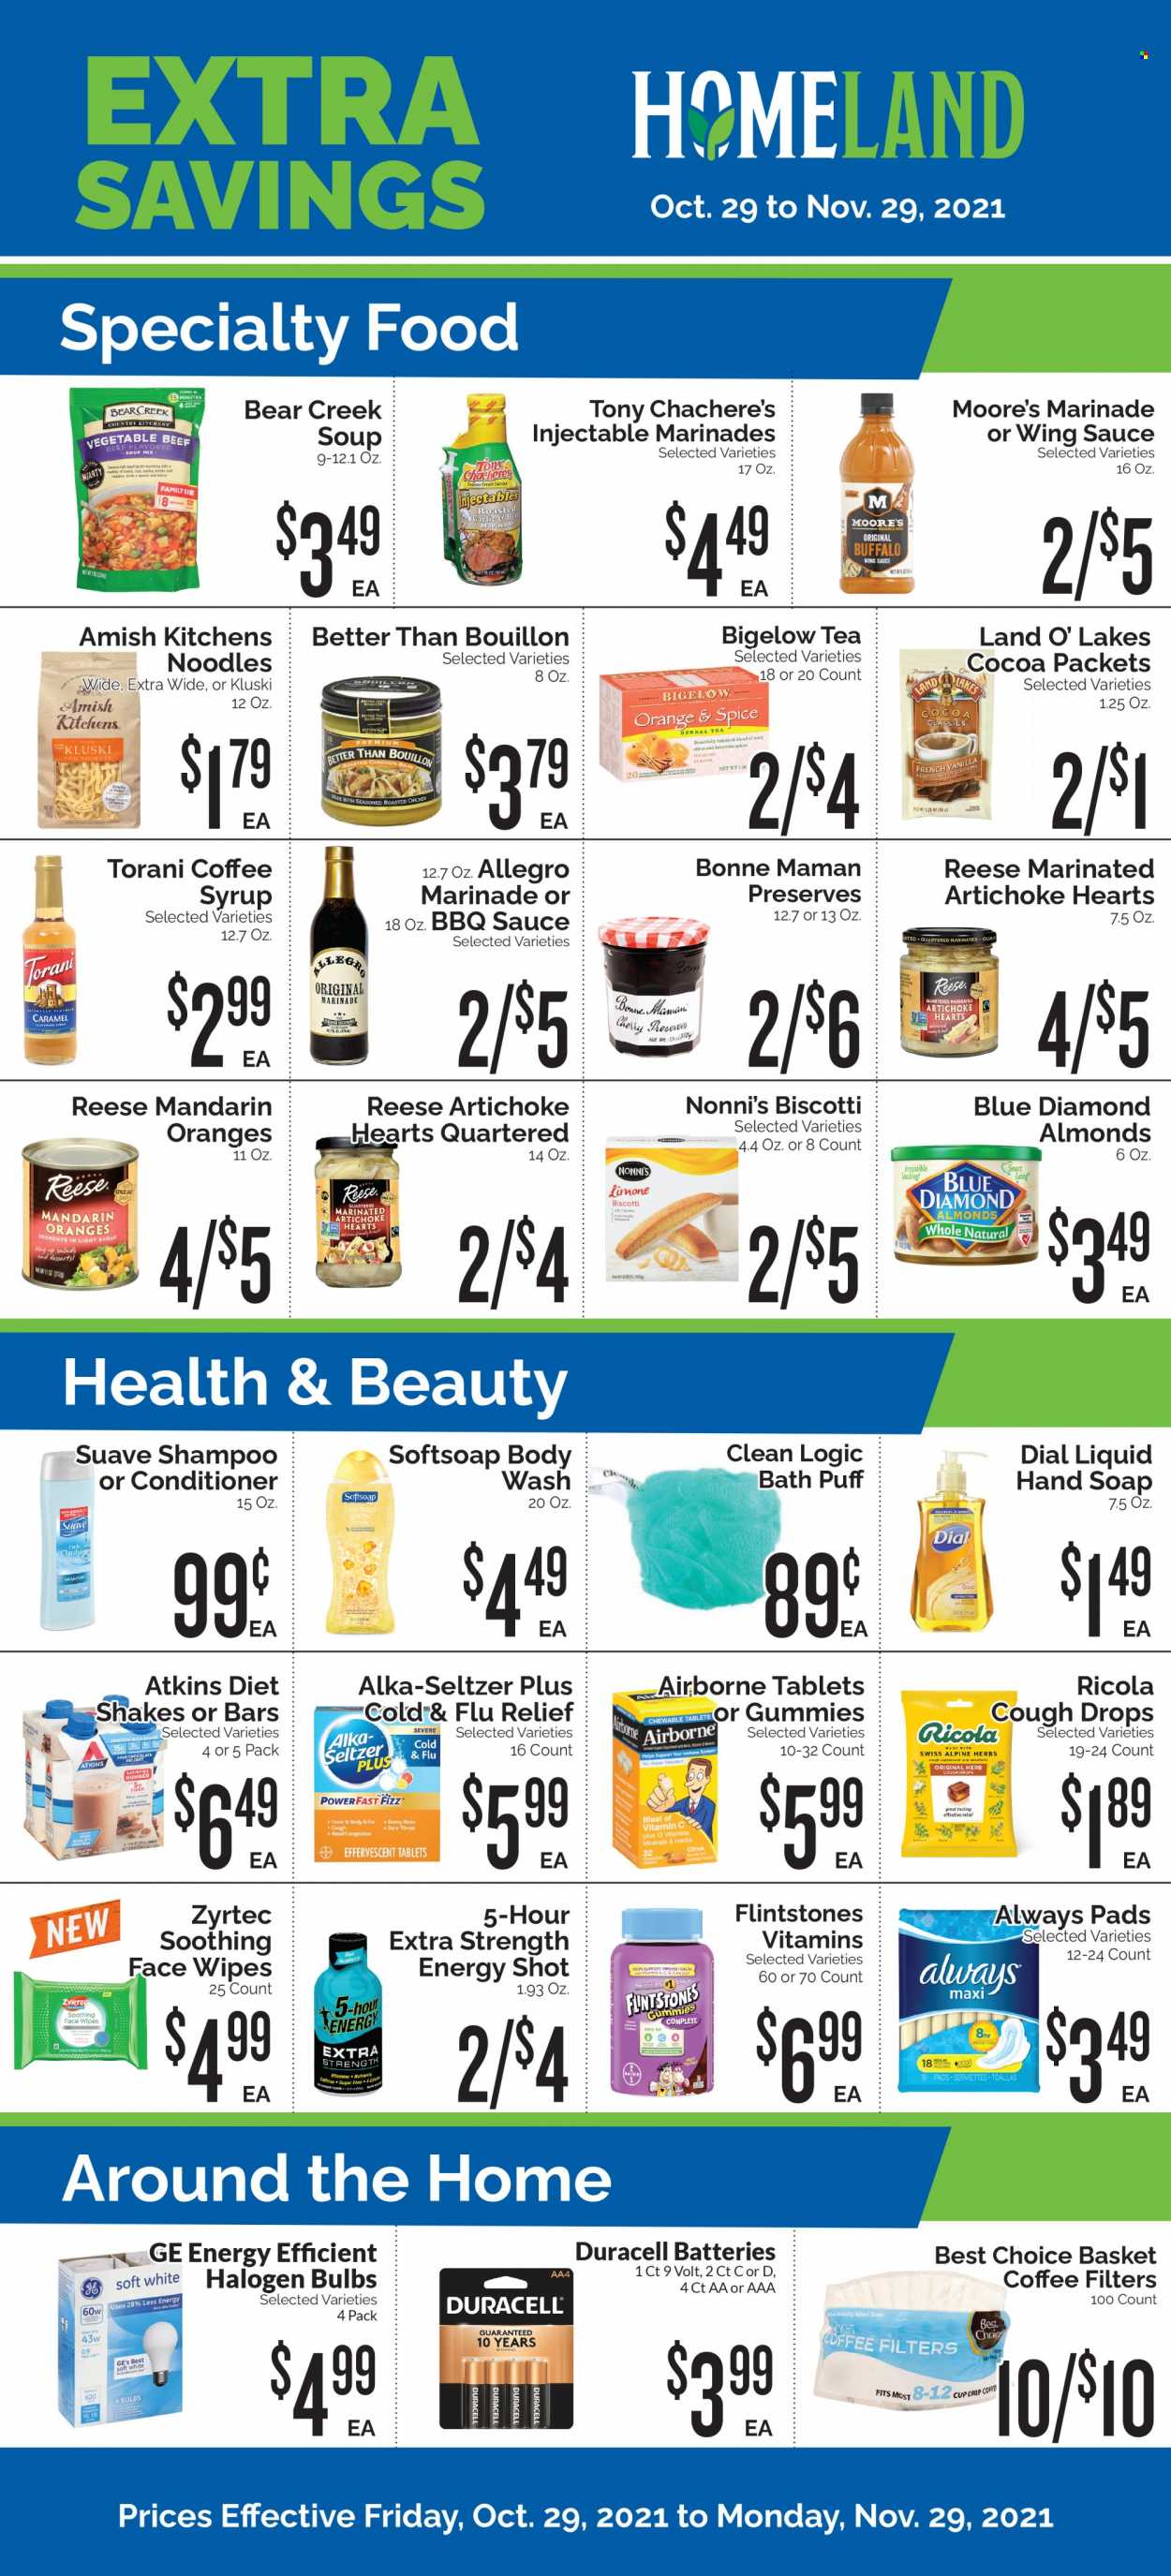 thumbnail - Homeland Flyer - 10/29/2021 - 11/29/2021 - Sales products - artichoke, mandarines, cherries, oranges, chicken roast, soup mix, soup, sauce, noodles, shake, eggs, biscotti, ricola, chocolate, bouillon, cocoa, spice, BBQ sauce, caramel, marinade, wing sauce, syrup, almonds, Blue Diamond, tea, coffee, wipes, body wash, shampoo, Softsoap, Suave, hand soap, Dial, soap, Always pads, conditioner, Cold & Flu, vitamin c, Zyrtec, Alka-seltzer, cough drops, Bayer. Page 1.